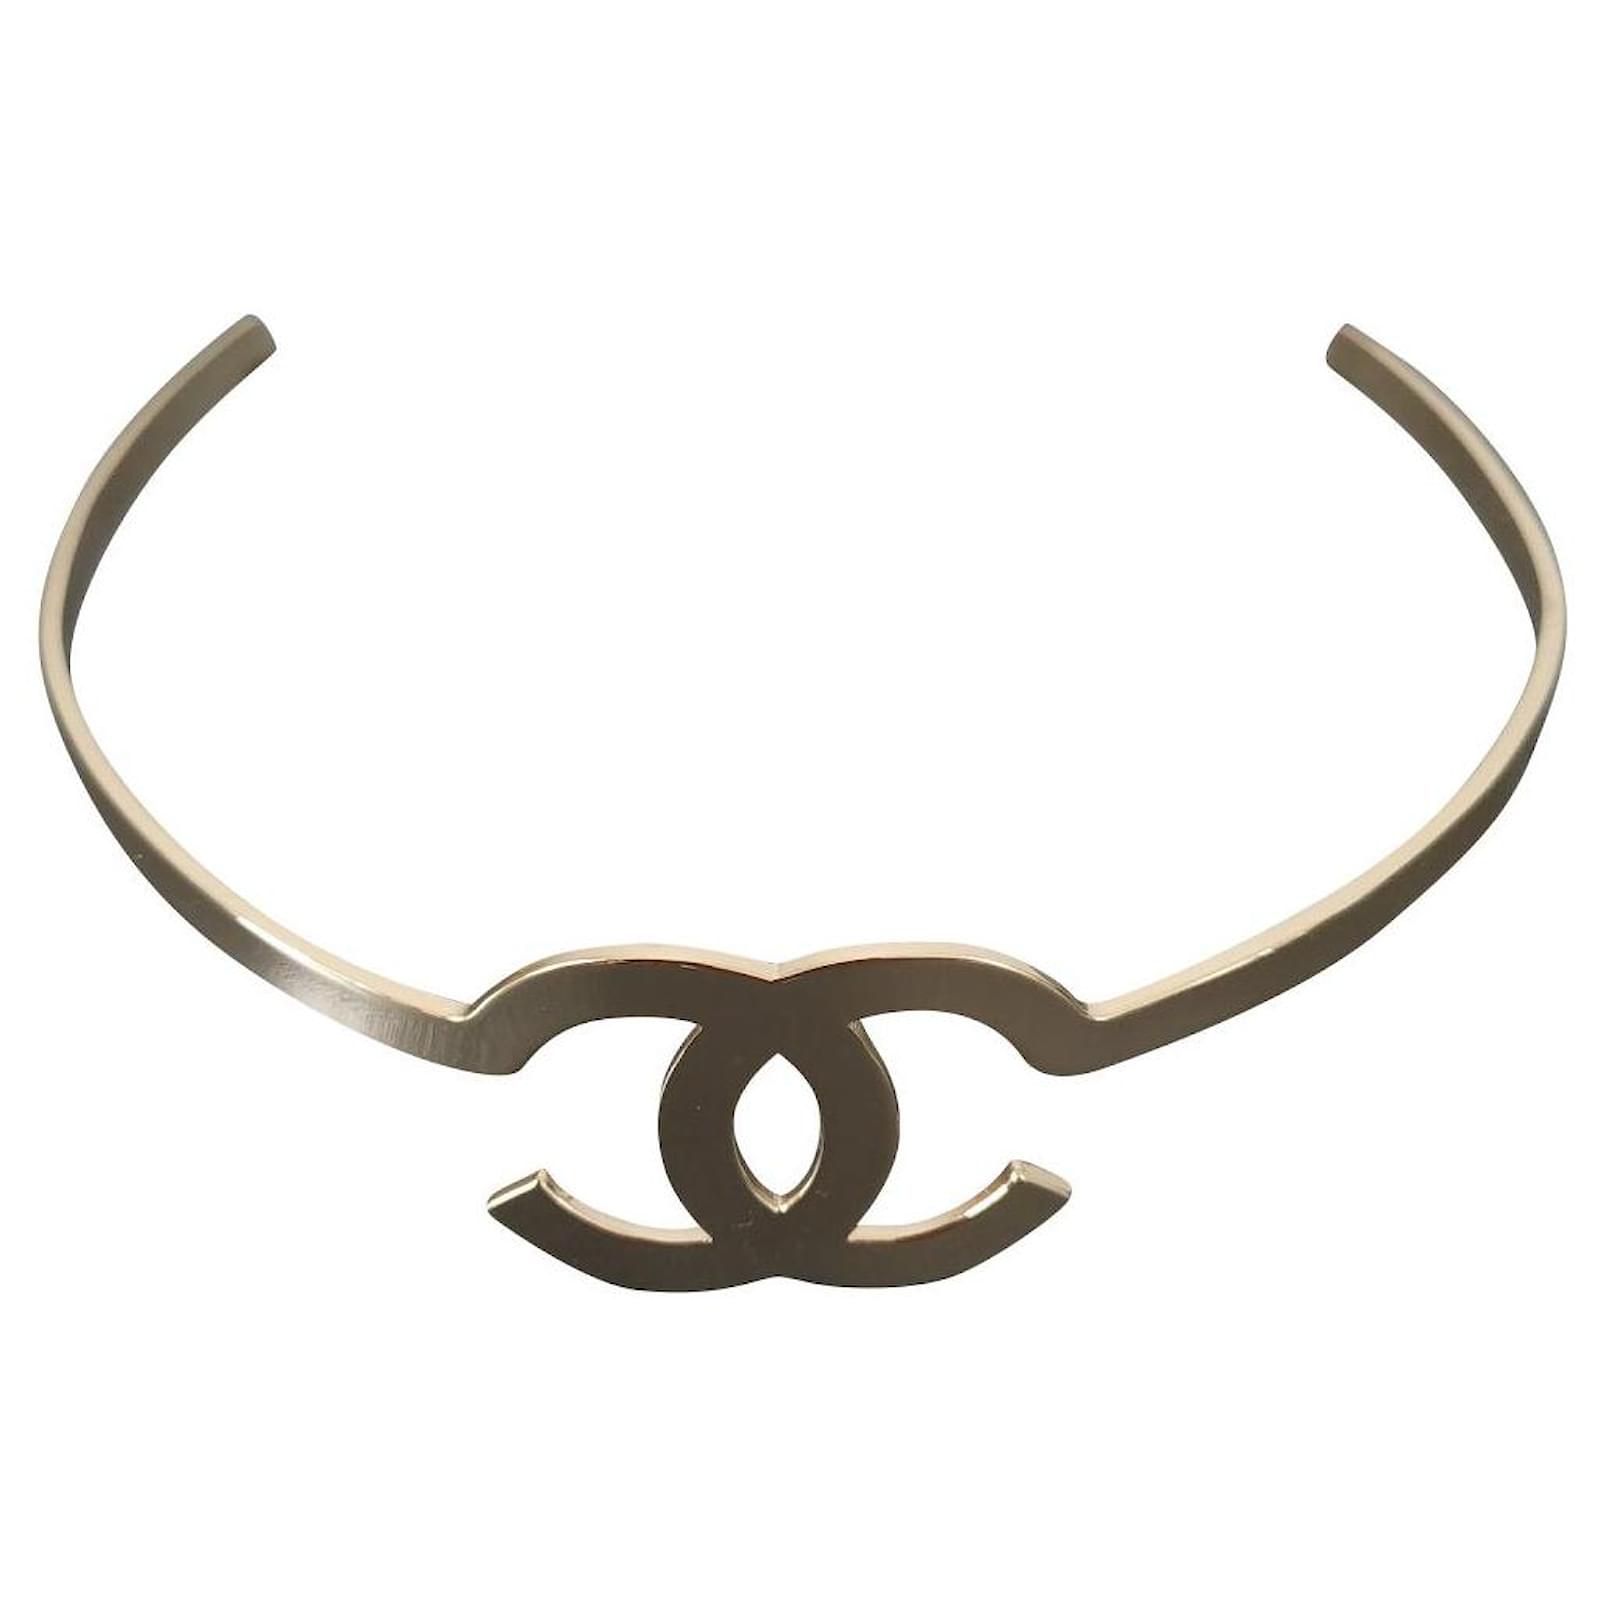 Get the best deals on CHANEL Headband Hair Accessories for Women